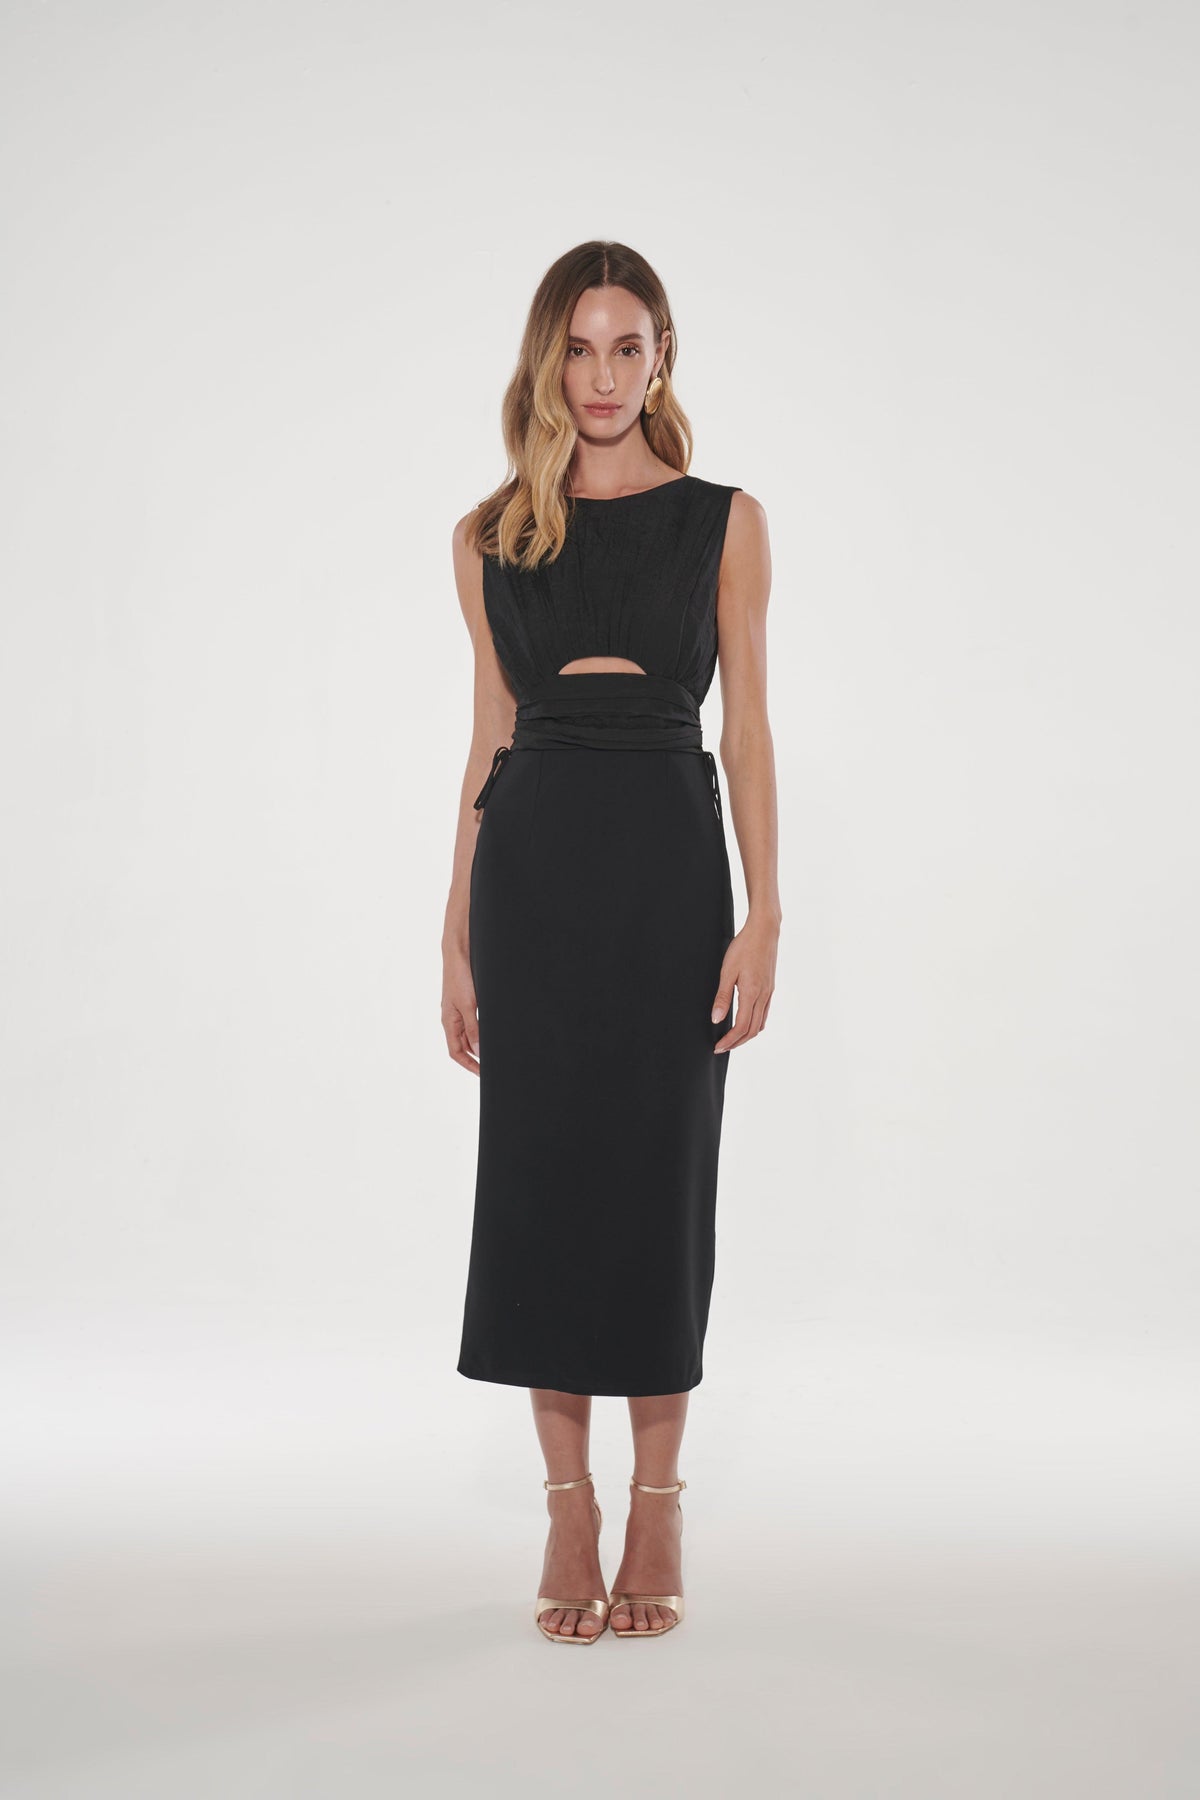 Cut-Out Midi Dress - Spring in Summer